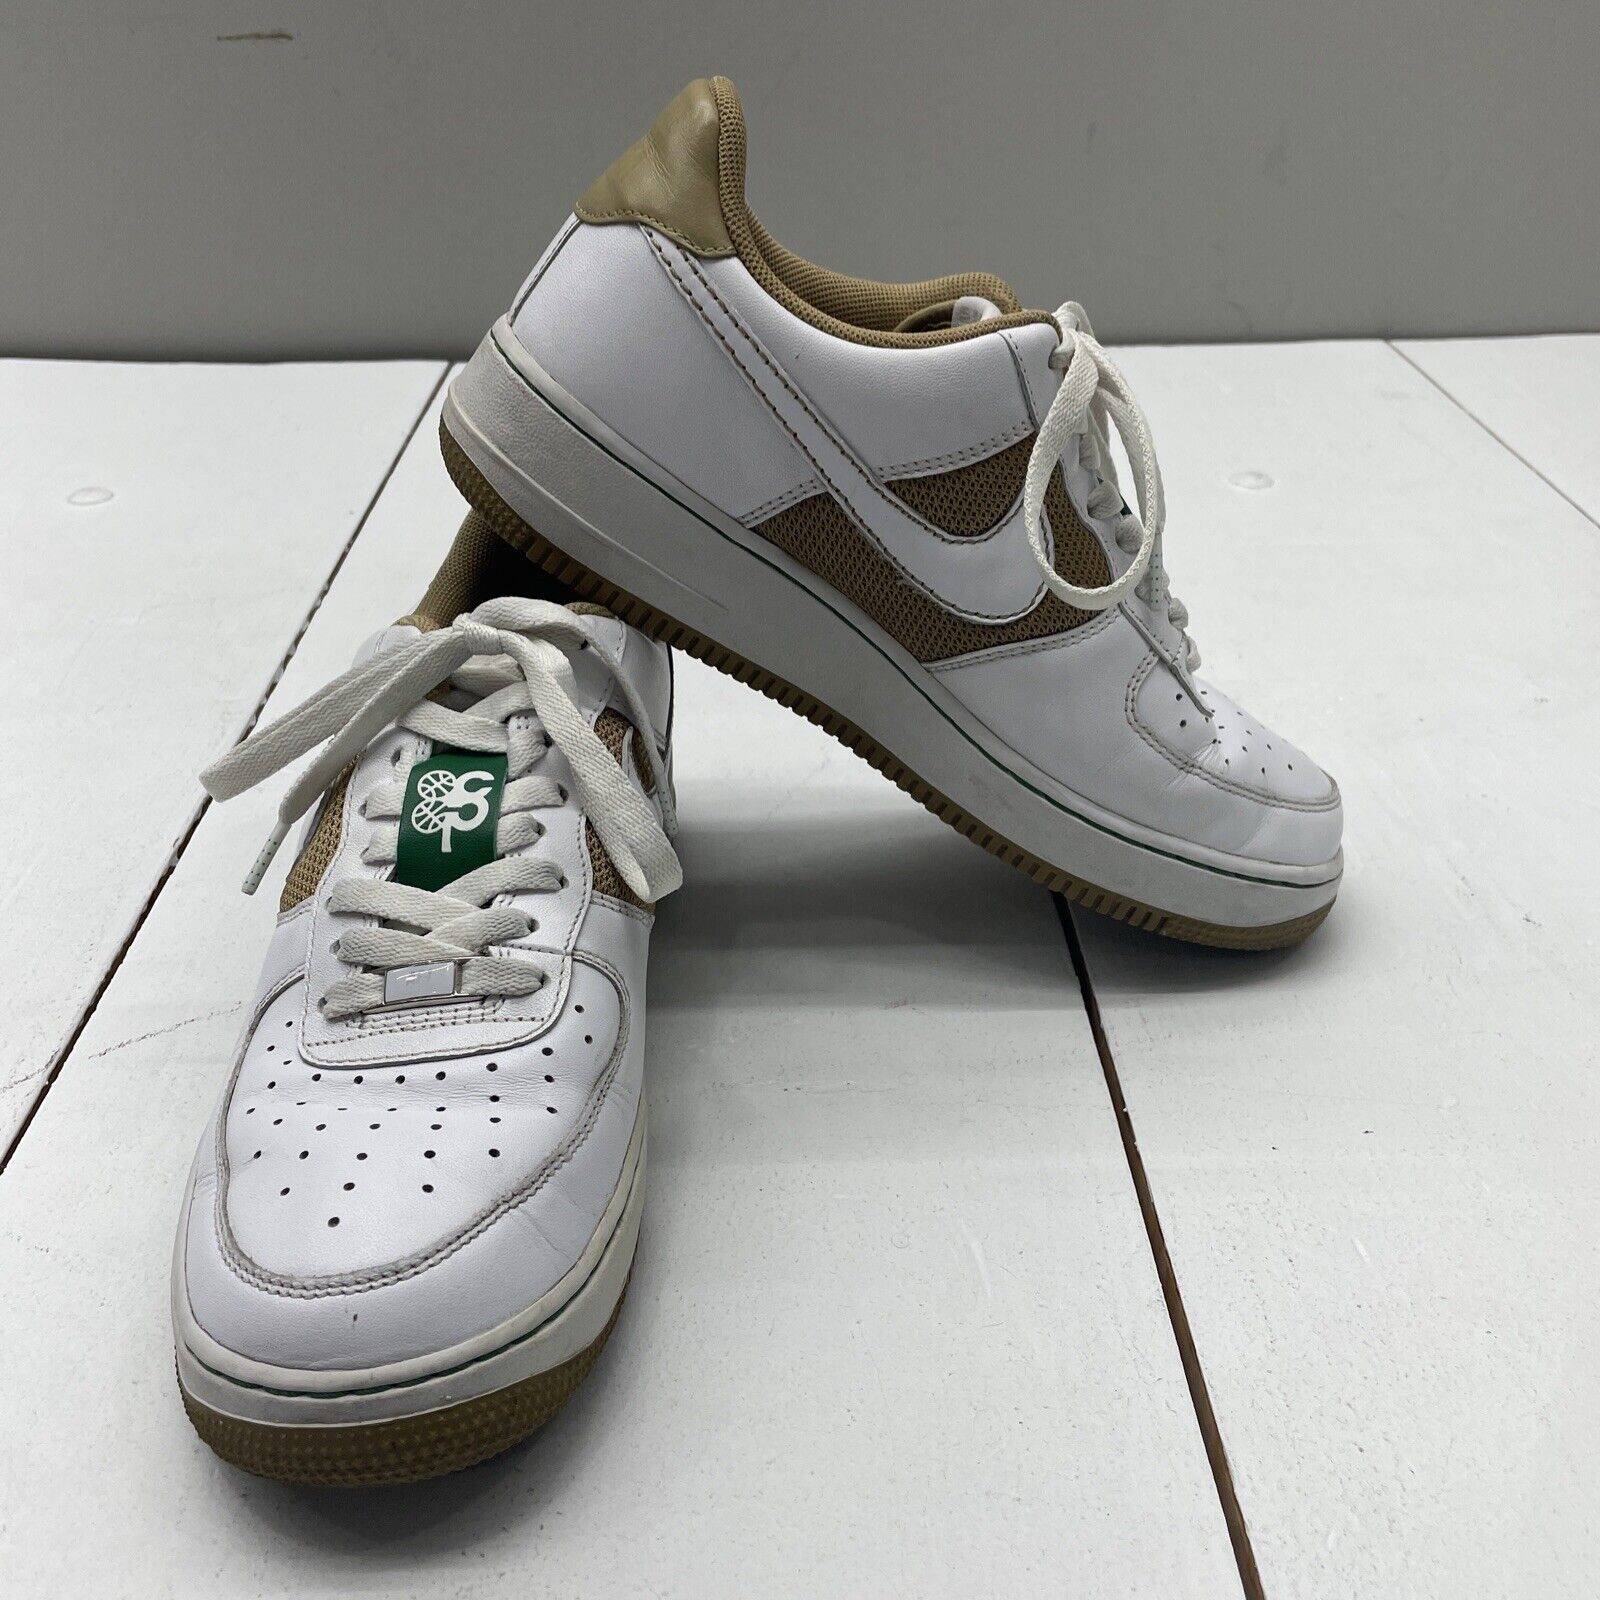 Nike Air Force 1 Low '07 'Cloverdale Park' White Green 315122-211 Men Size 9